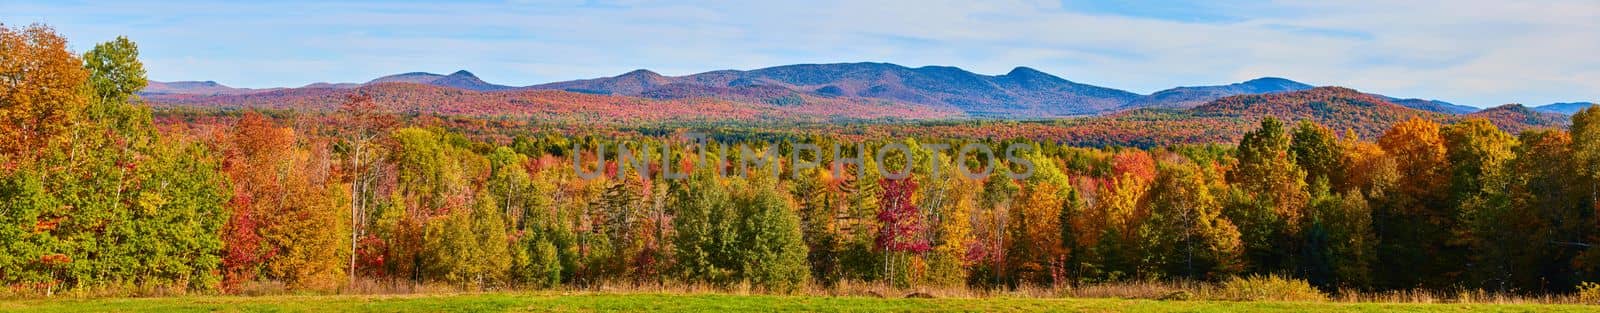 Wide panorama of stunning fall mountain landscape in New York by njproductions